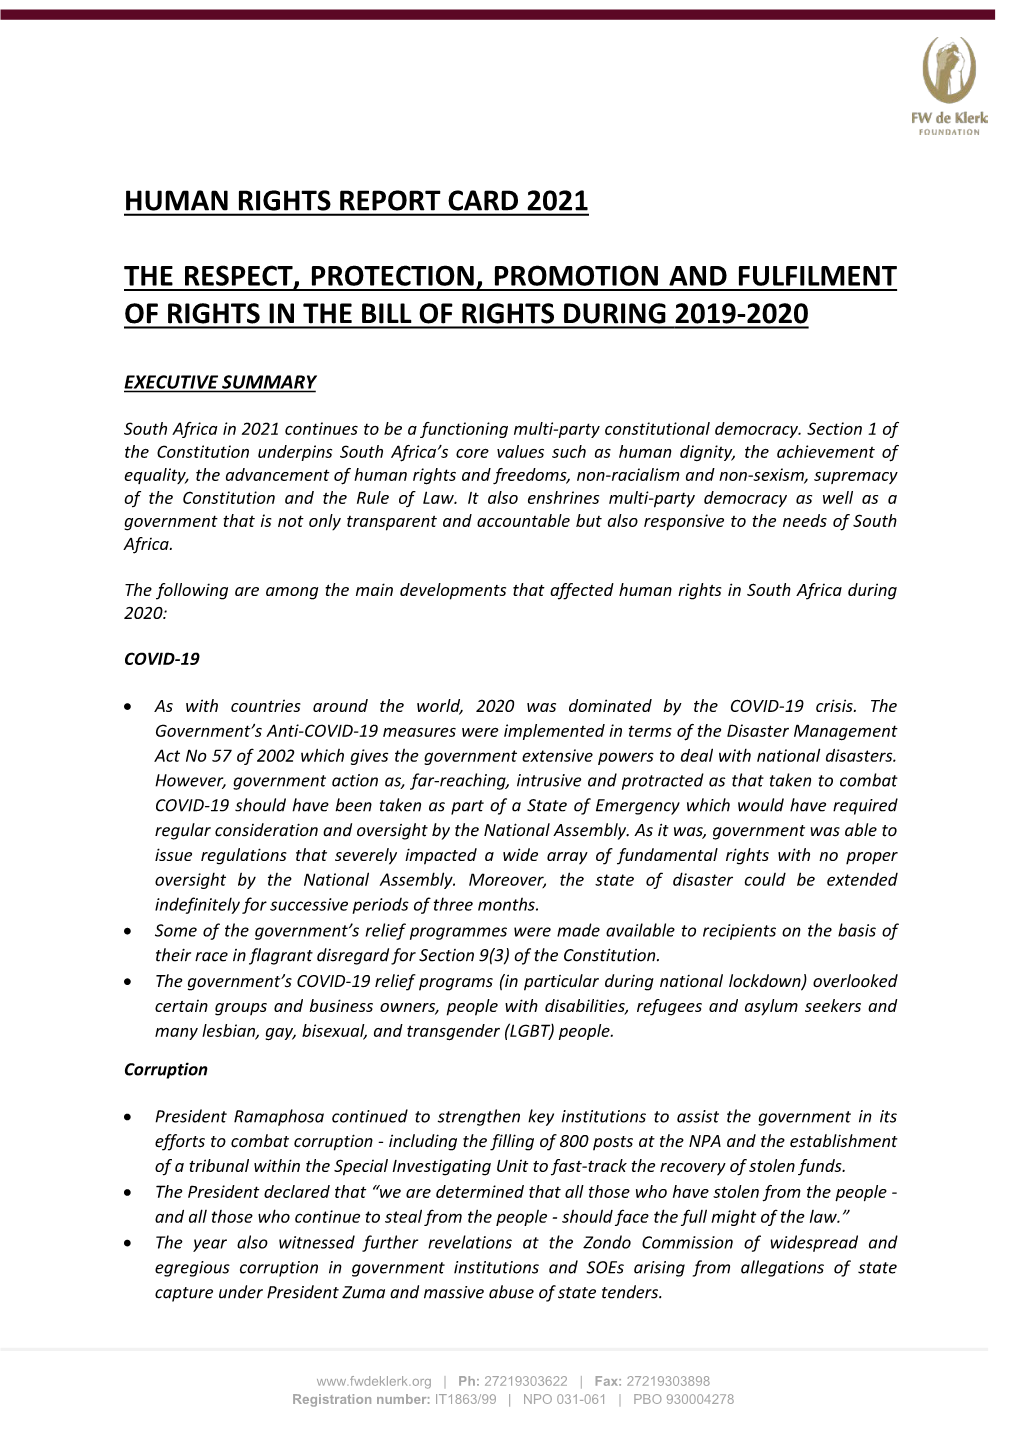 Human Rights Report Card 2021 the Respect, Protection, Promotion And